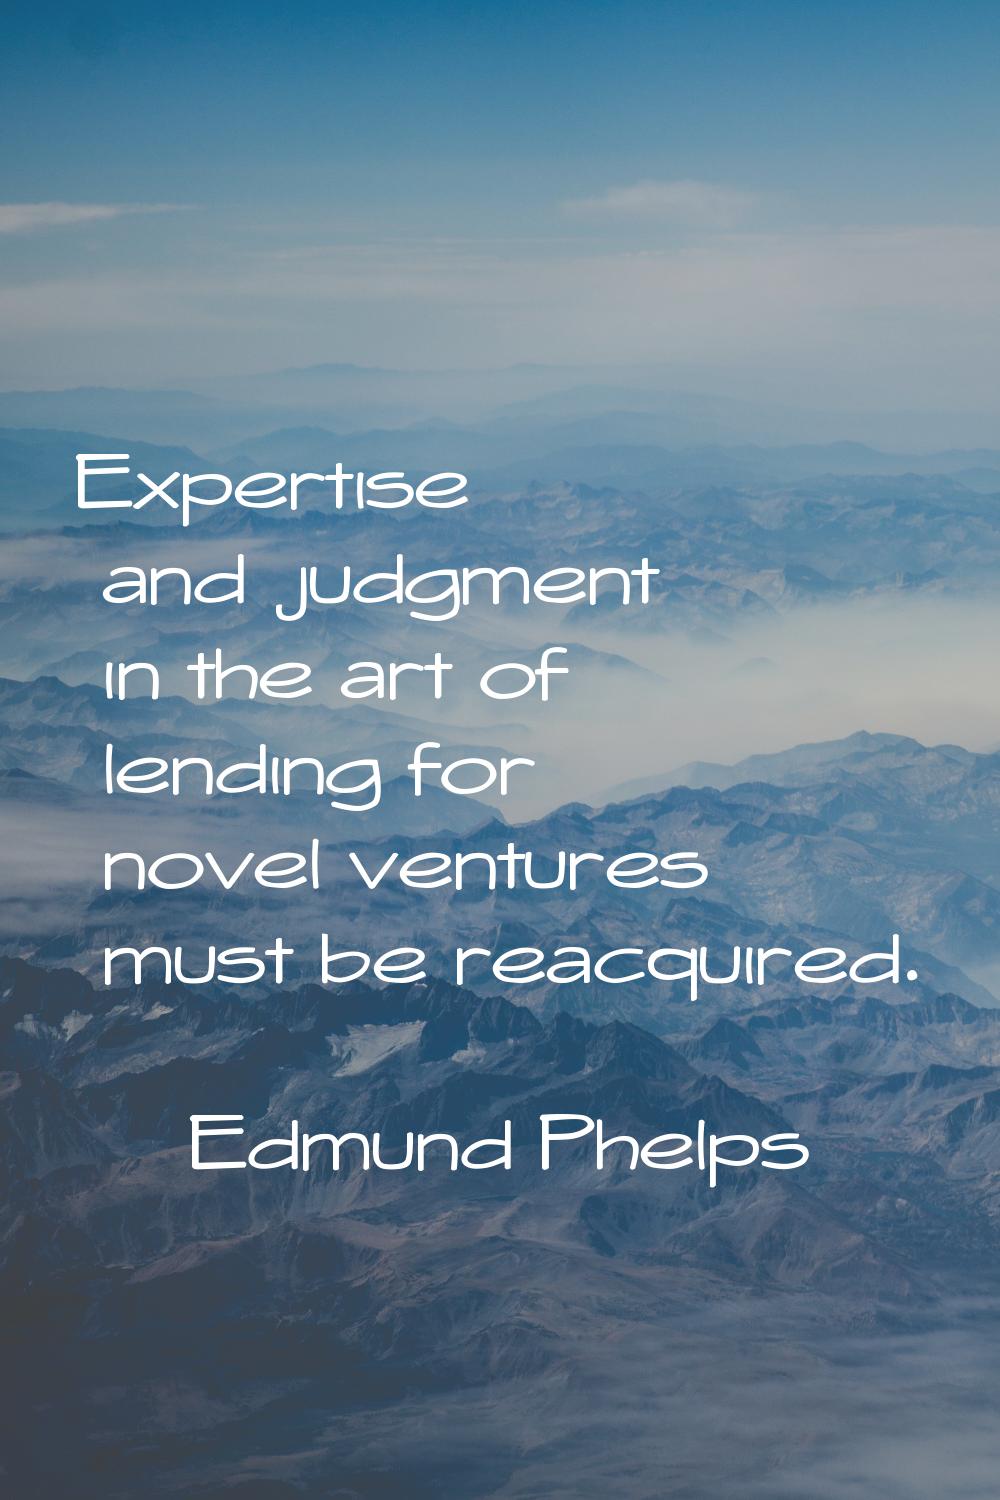 Expertise and judgment in the art of lending for novel ventures must be reacquired.